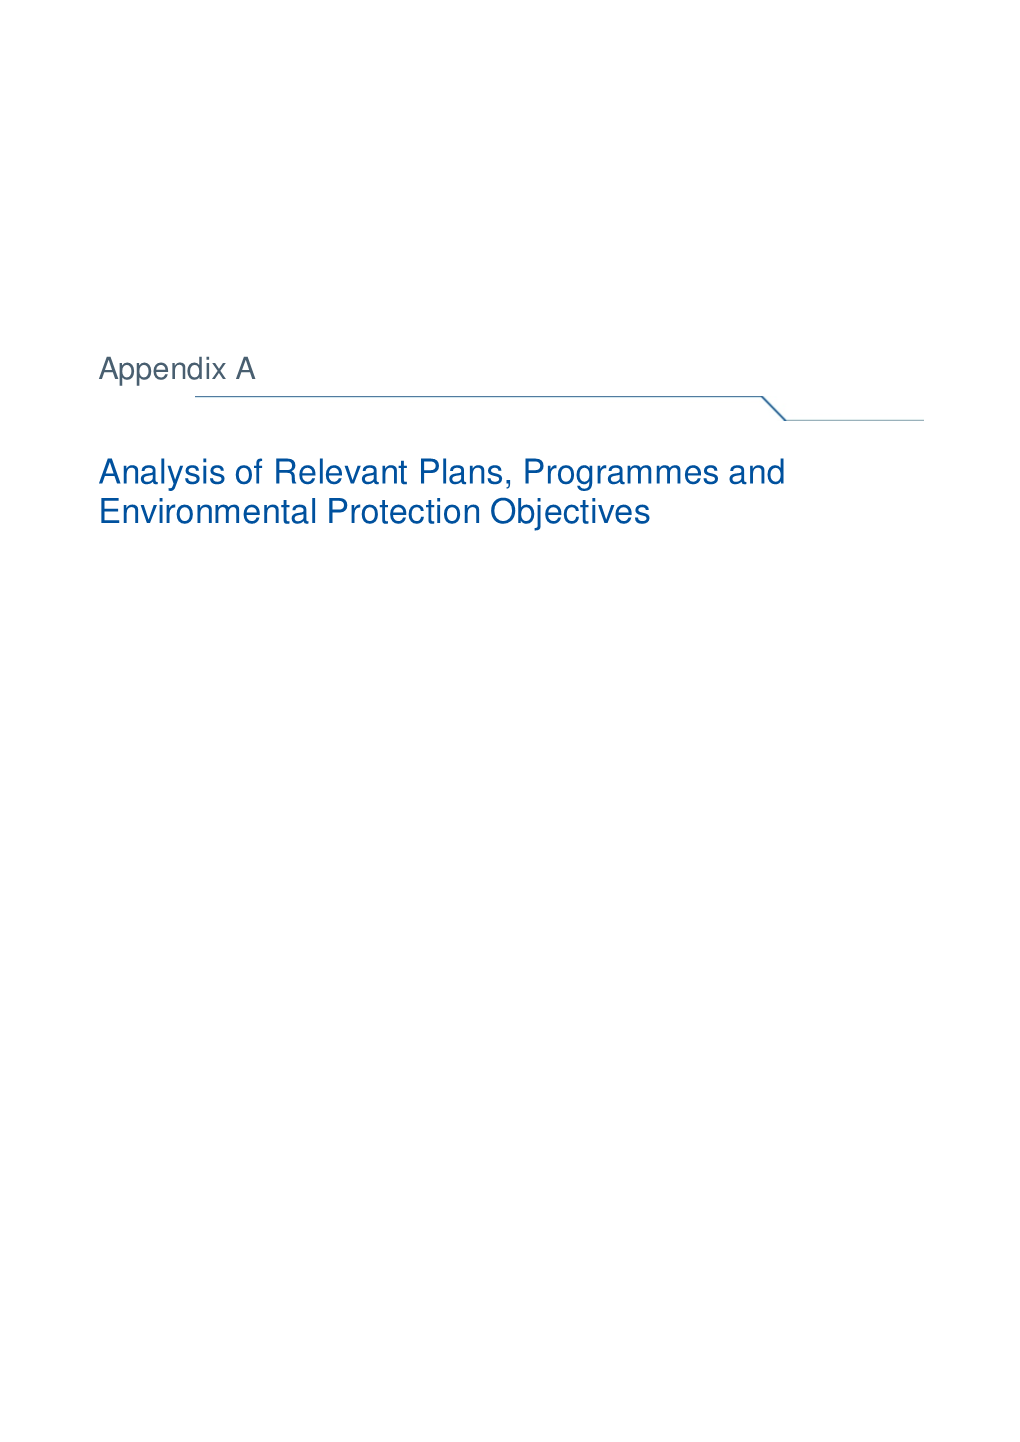 Analysis of Relevant Plans, Programmes and Environmental Protection Objectives